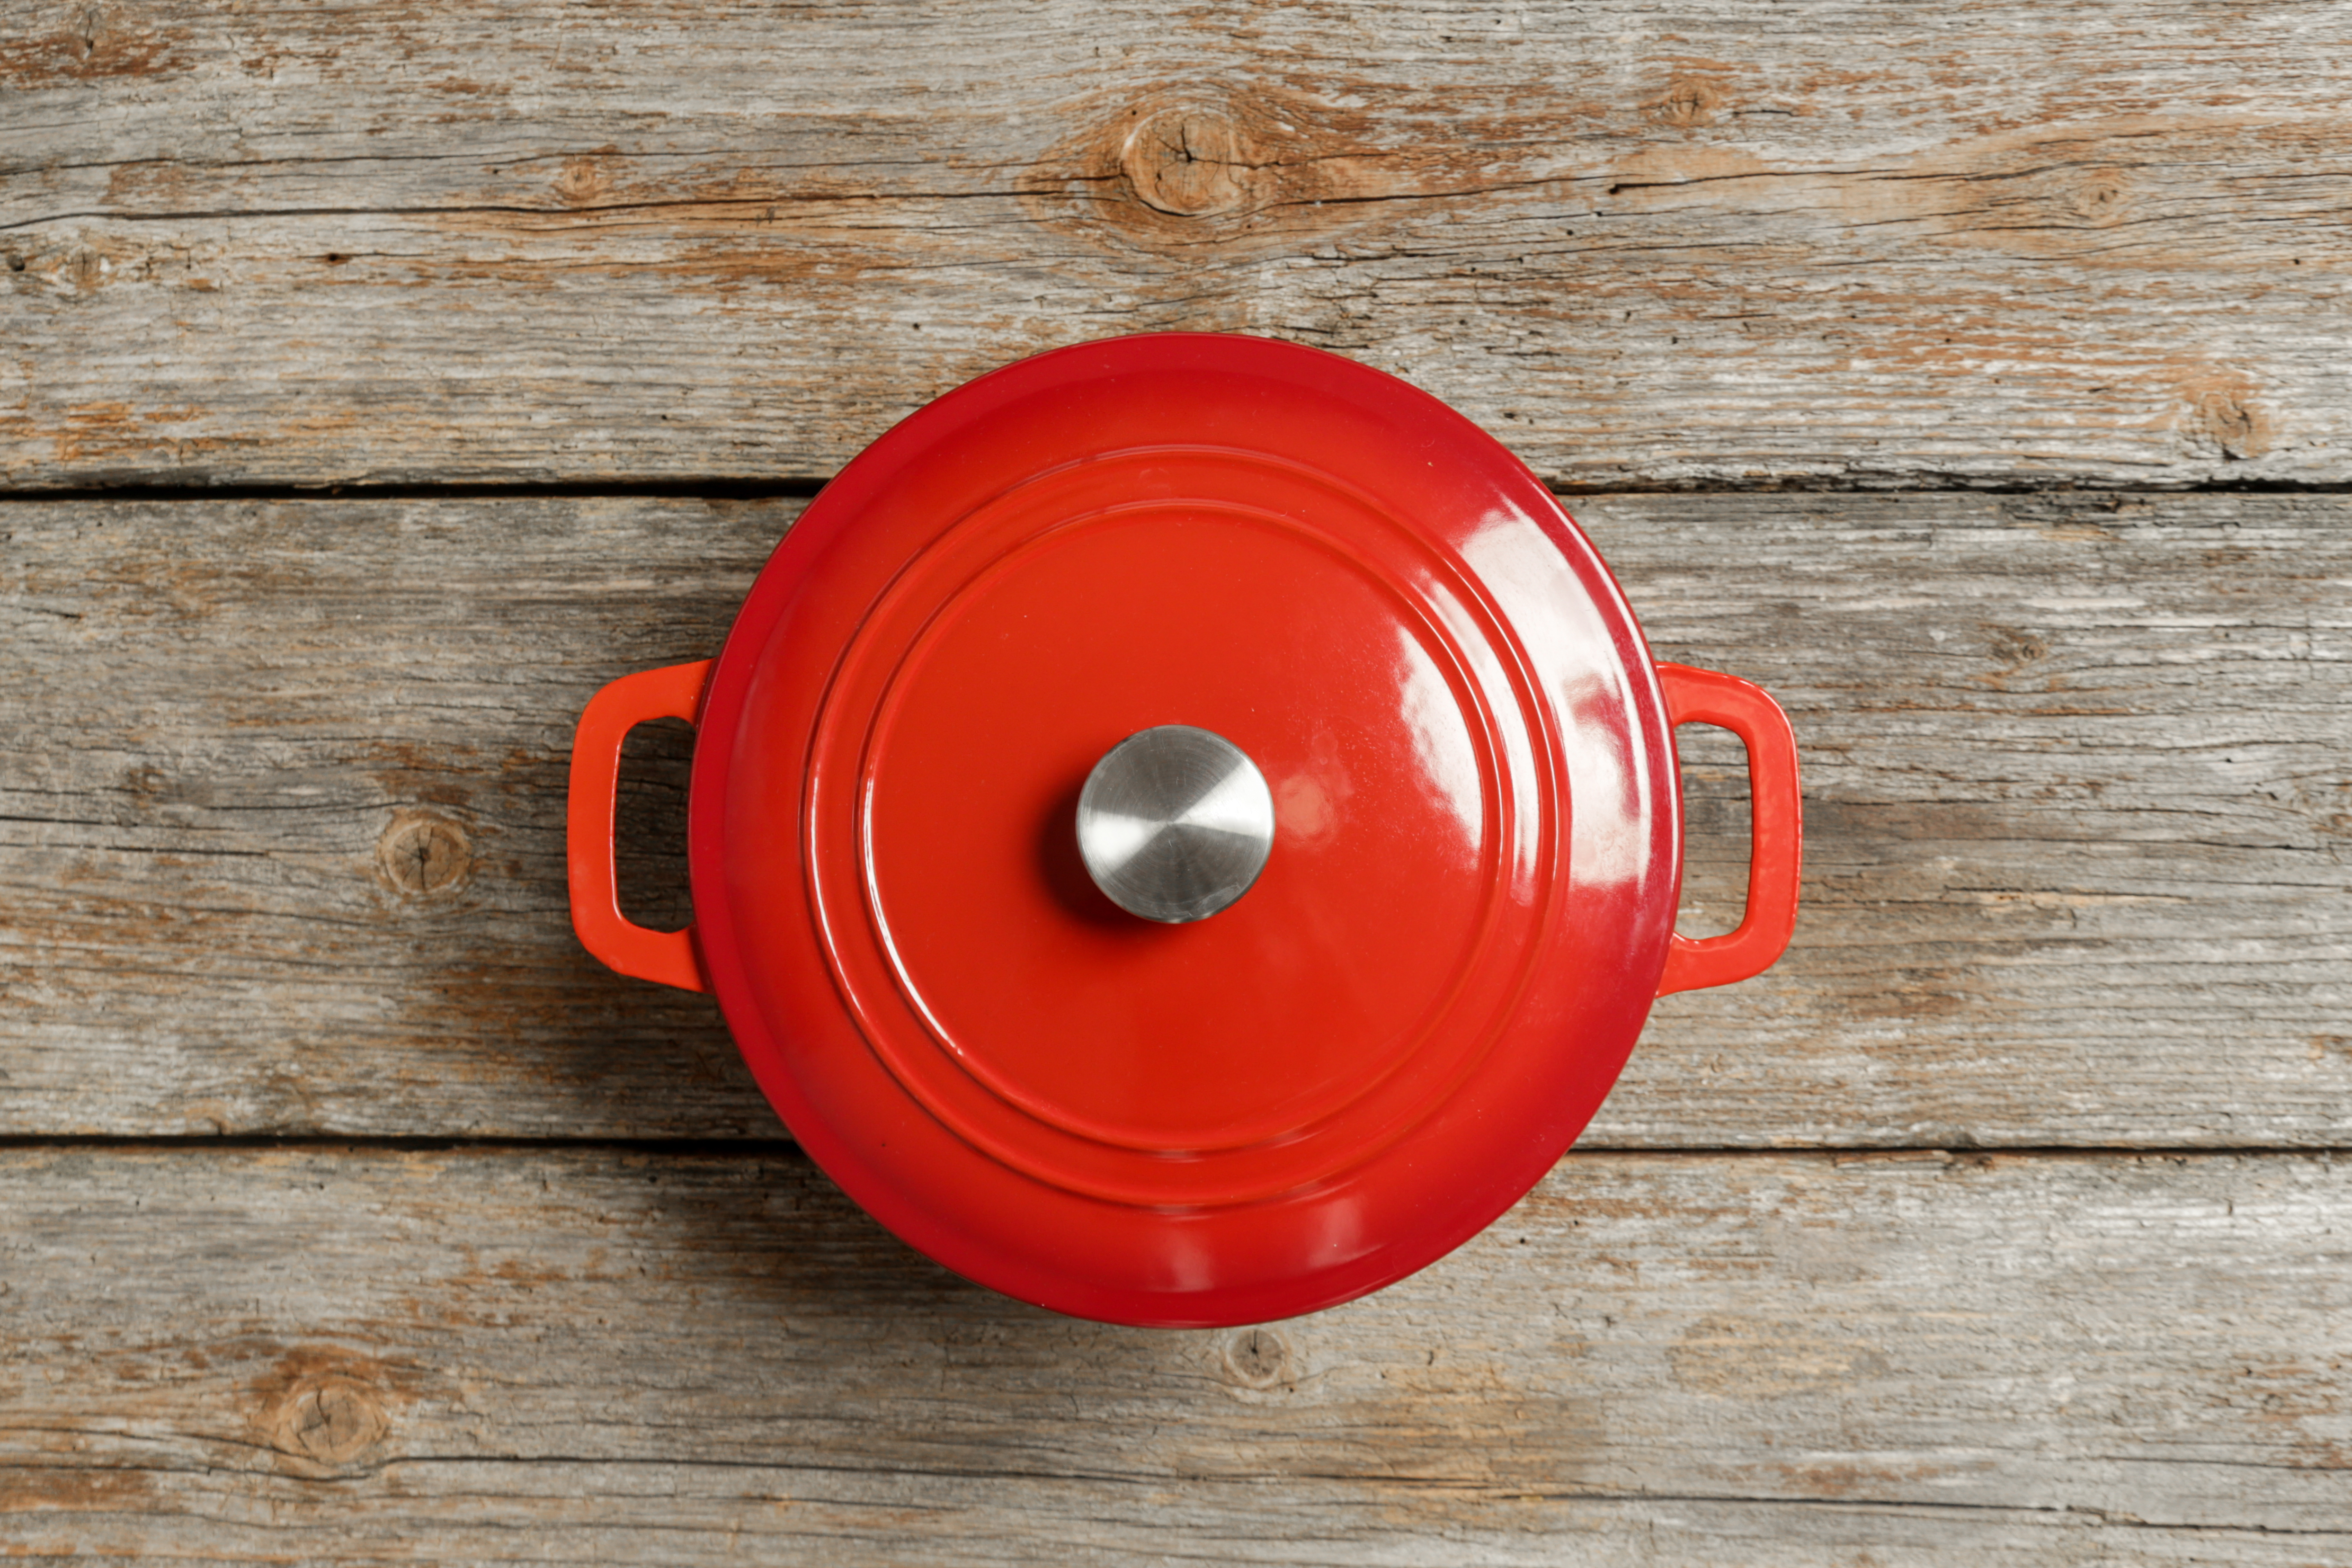 How to clean enamel cookware for longevity